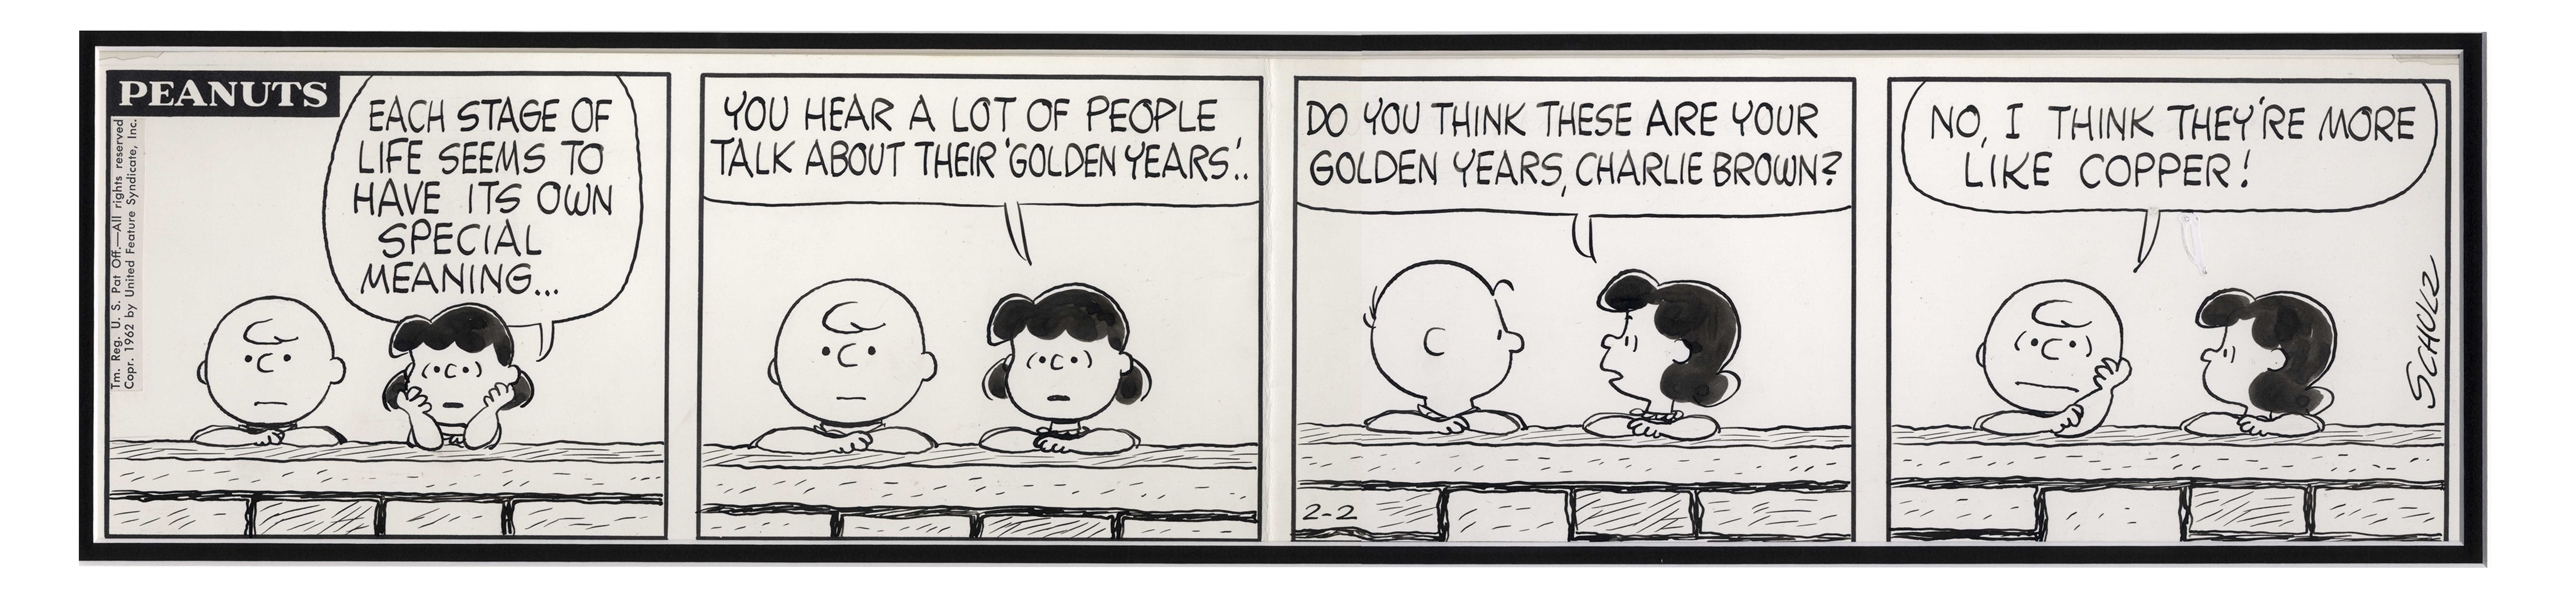 Charles Schulz Hand-Drawn ''Peanuts'' Comic Strip From 1962 -- Charlie Brown & Lucy Discuss their ''Golden Years'', or as Charlie Brown Puts It, Their ''Copper Years''